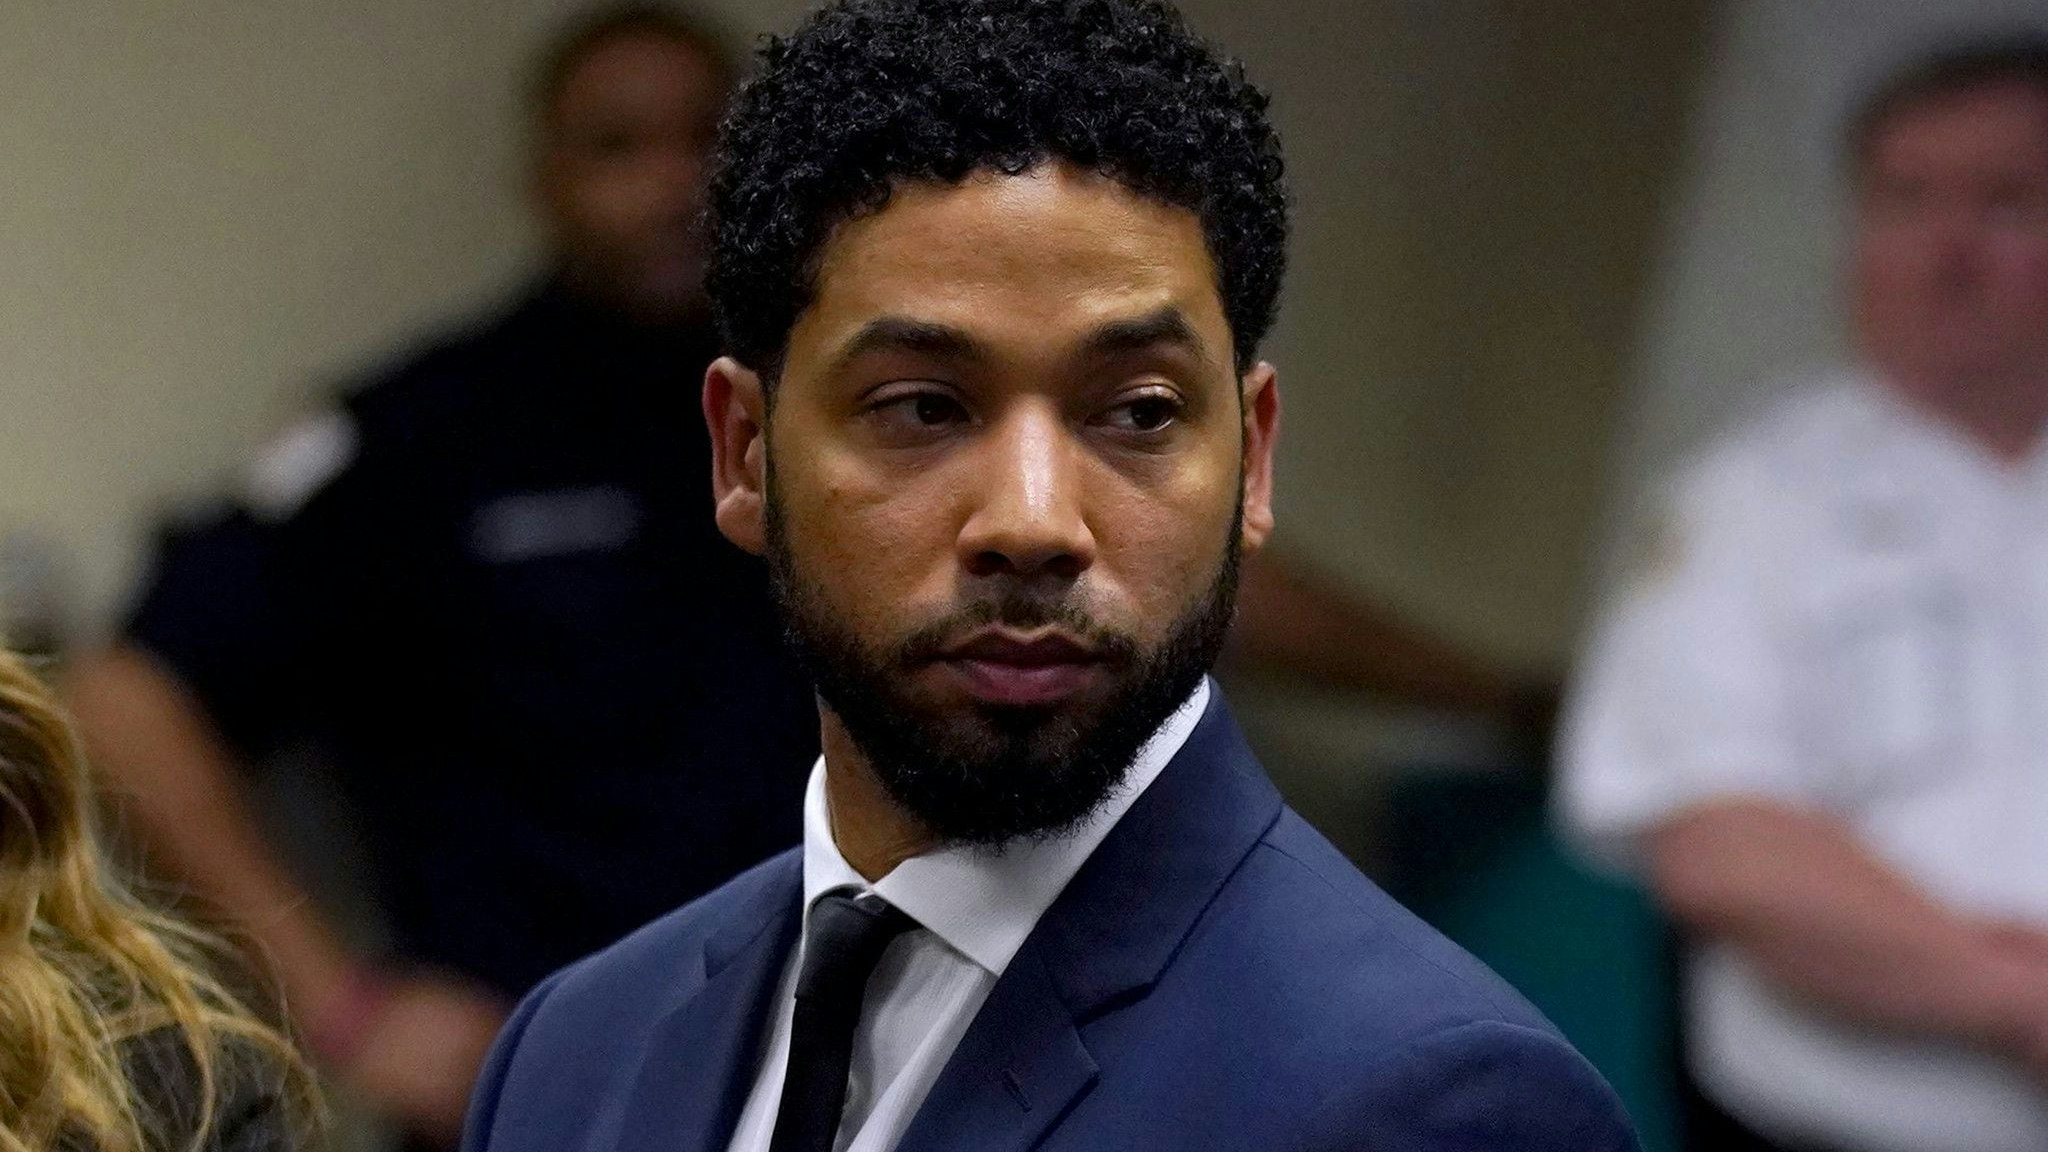 TV actor Jussie Smollett stands before Cook County Circuit Judge Steven Watkins on March 14, 2019, at the Leighton Criminal Court Building in Chicago, where he pled not guilty.